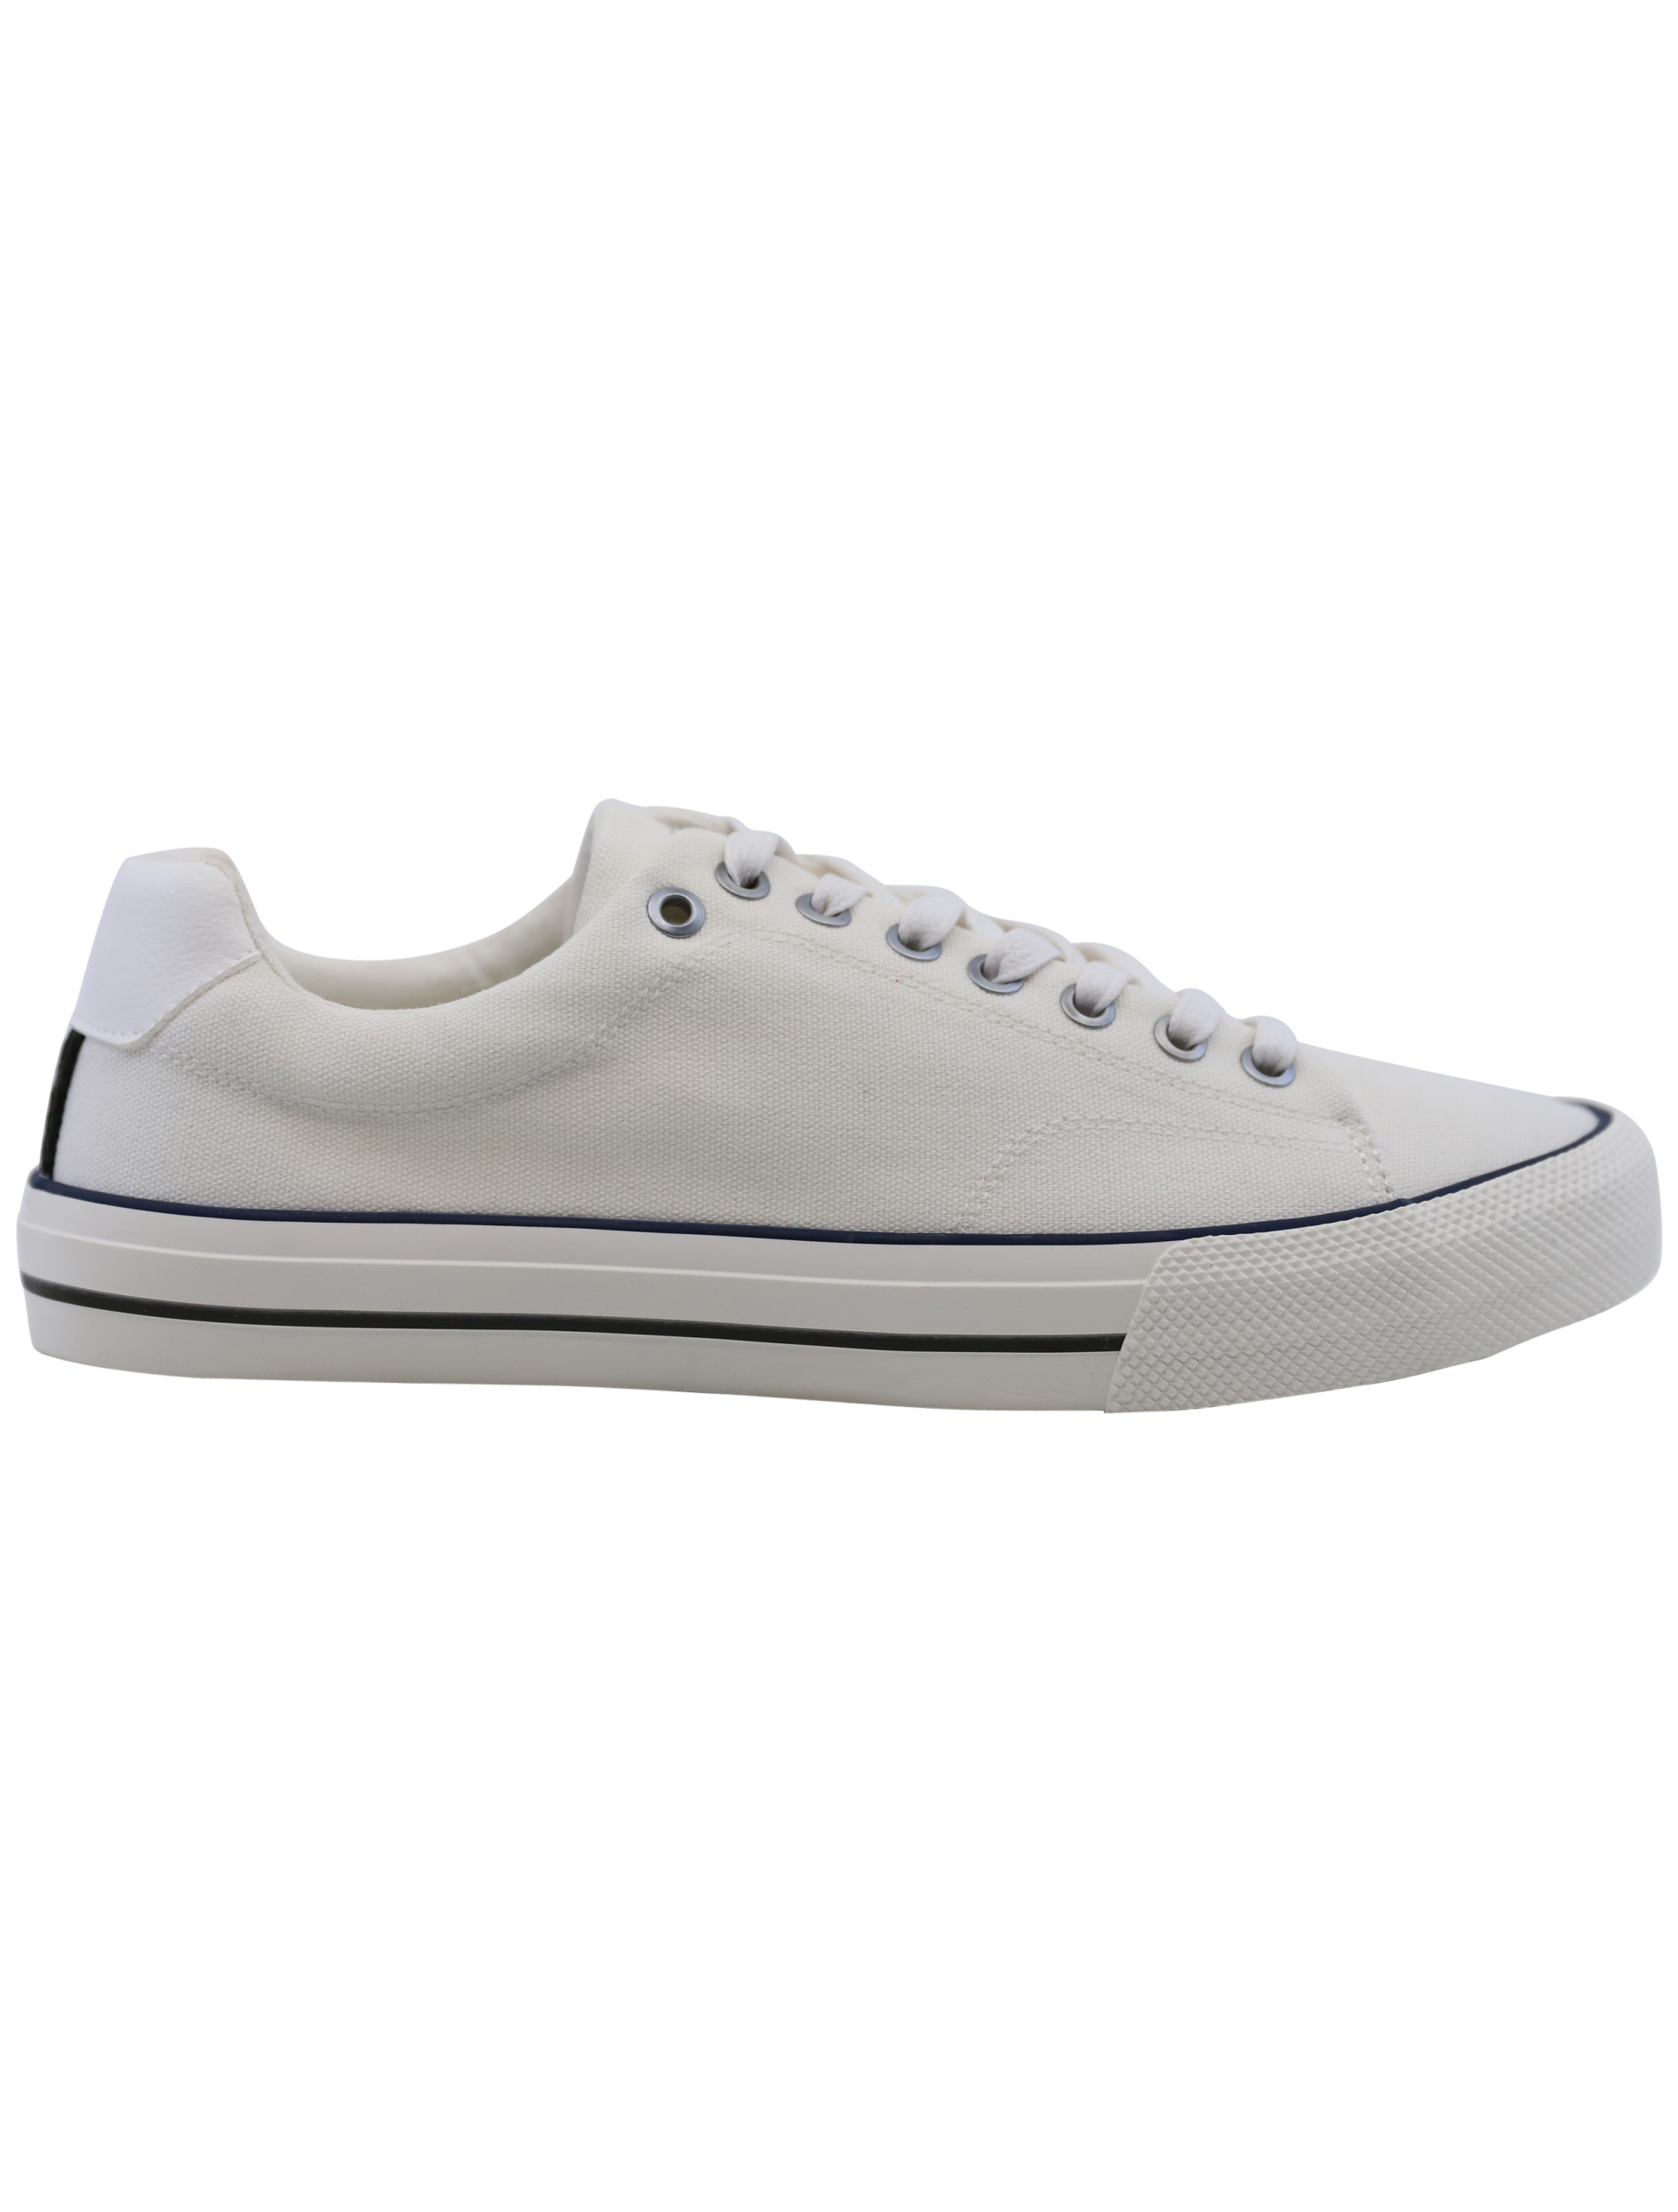 Lindbergh Sneakers white / off white